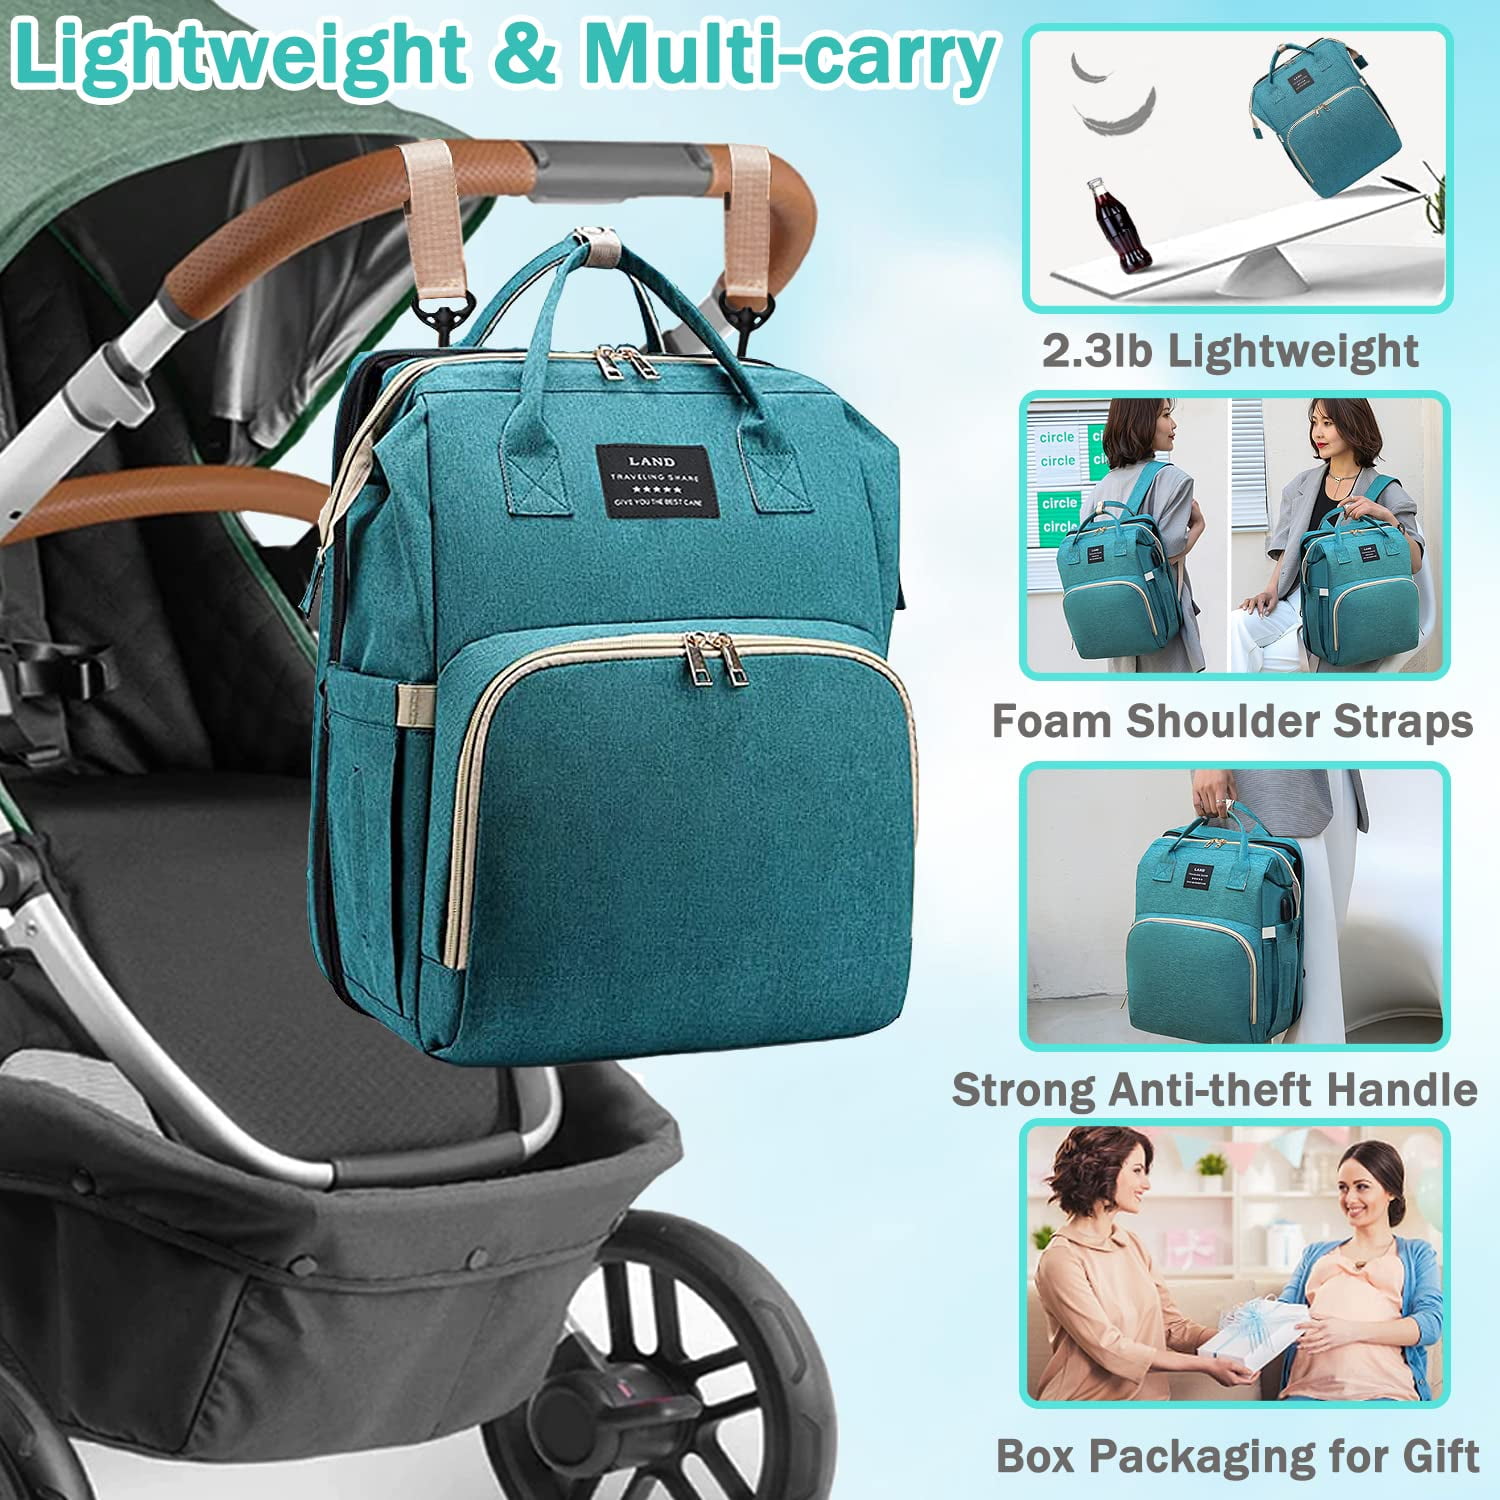 DIAPER BAG BACKPACK CHANGING STATION COMBO. PORTABLE 4 IN 1 TRAVEL BAG WITH  NET